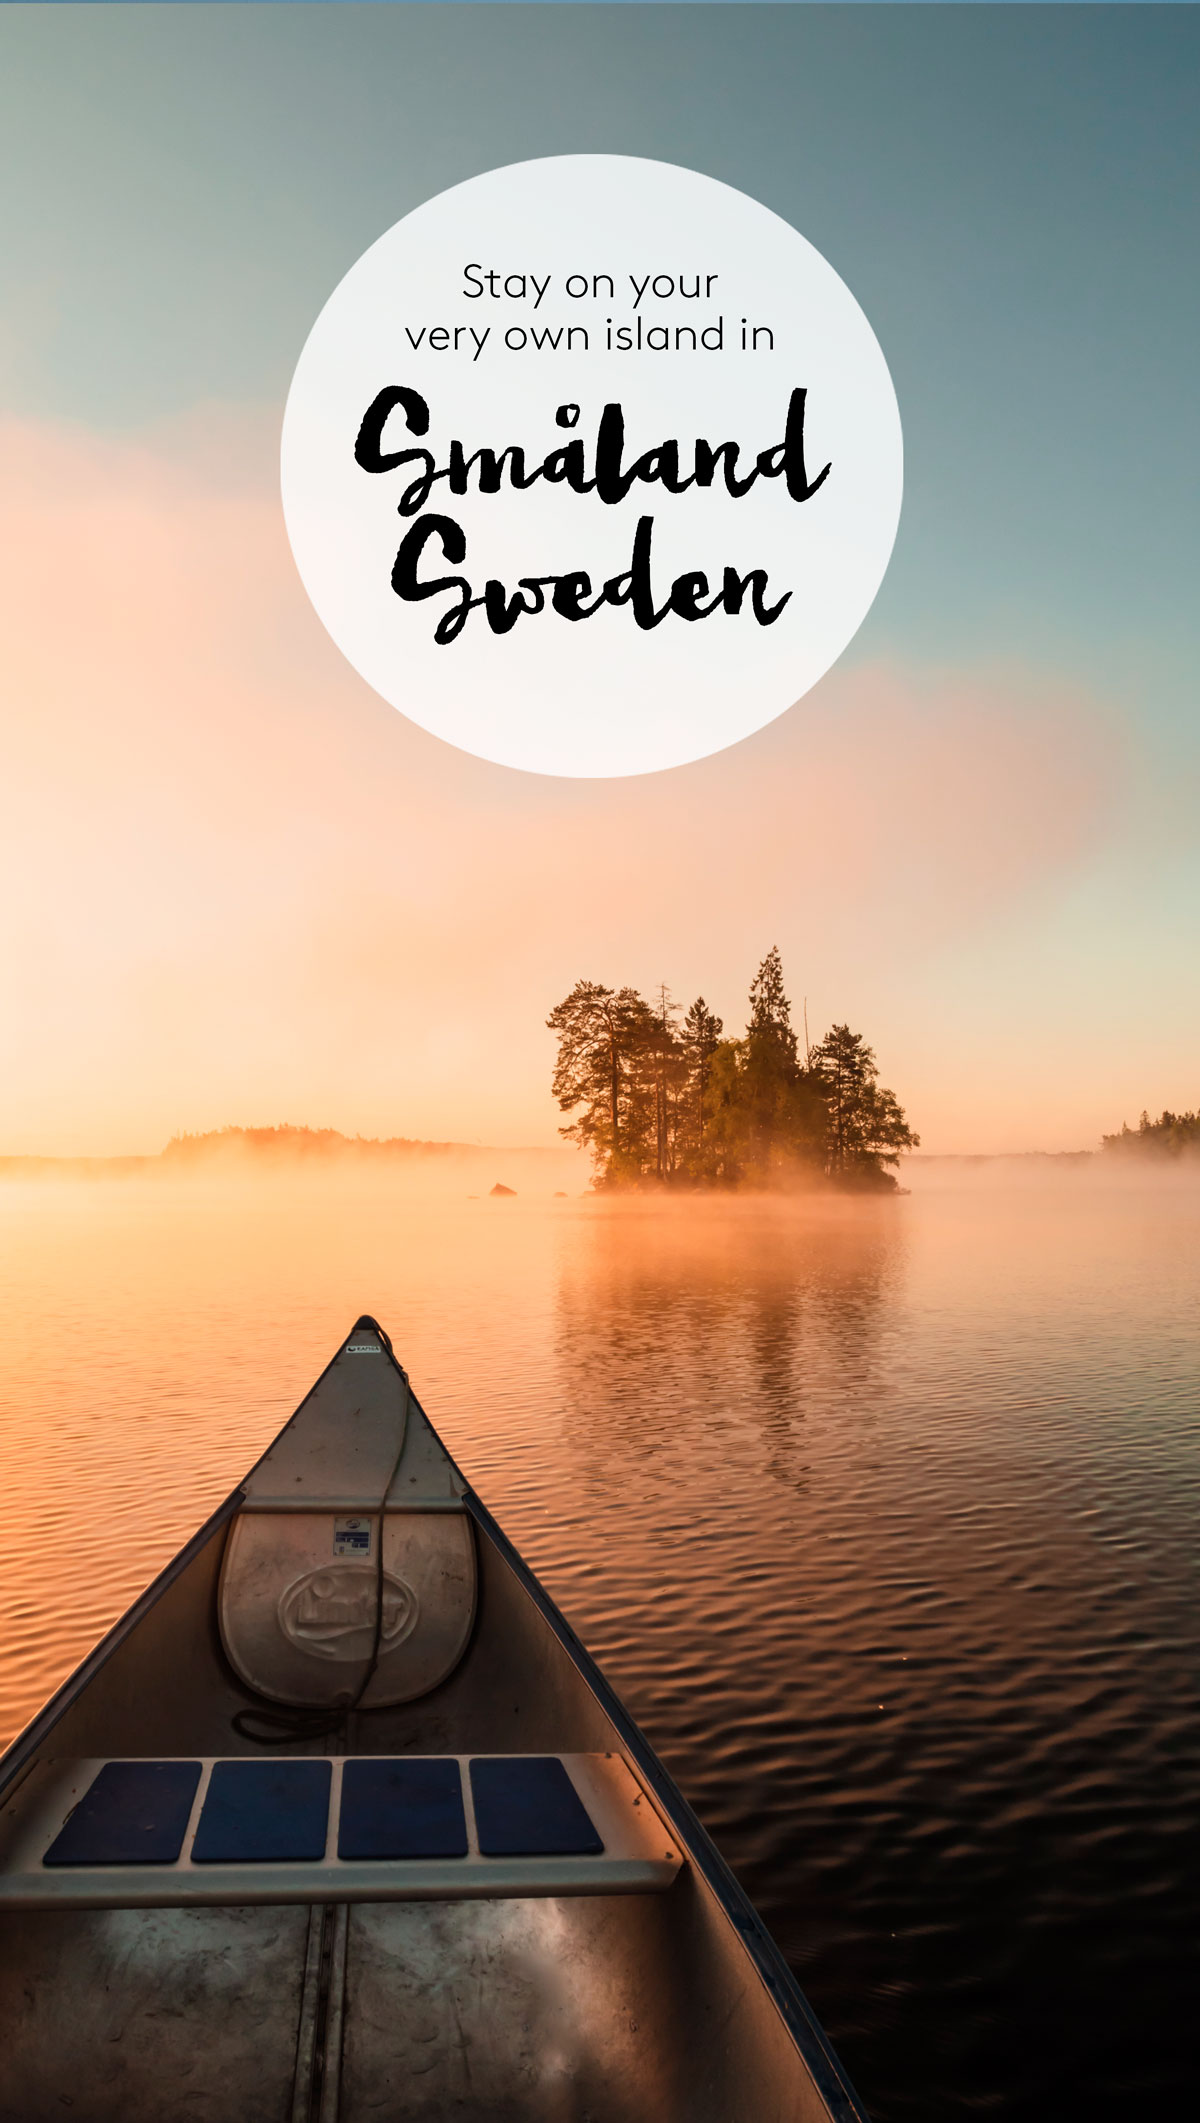 Småland Sweden / stay in your very own island